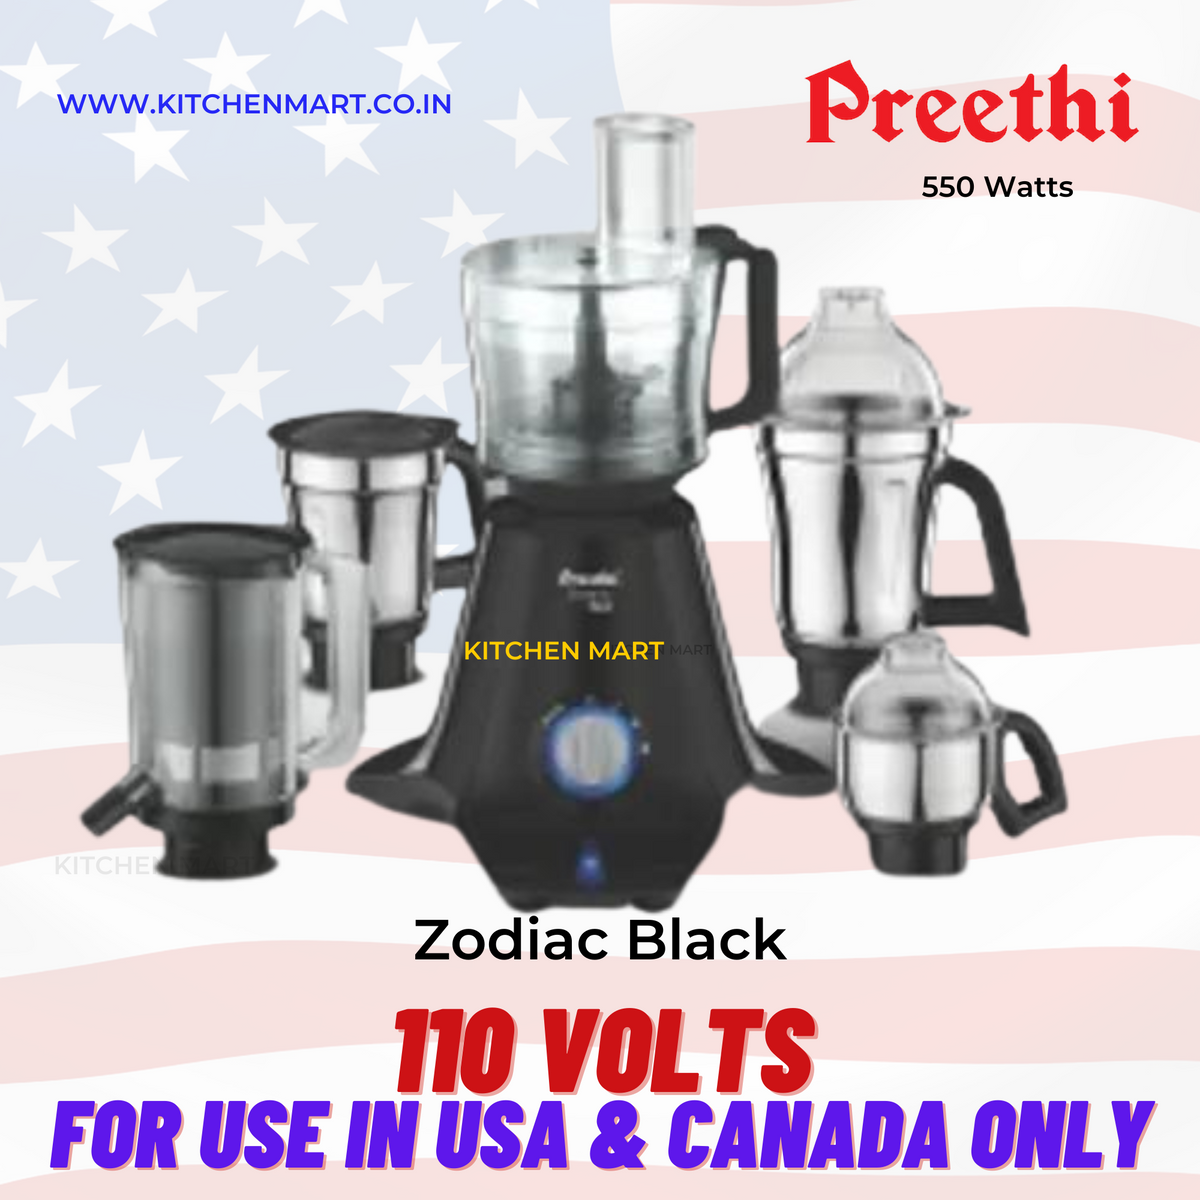 Preethi Zodiac BLACK  550-Watt Mixer Grinder with 5 Jars (110 Volts for use in USA &amp; Canada only)